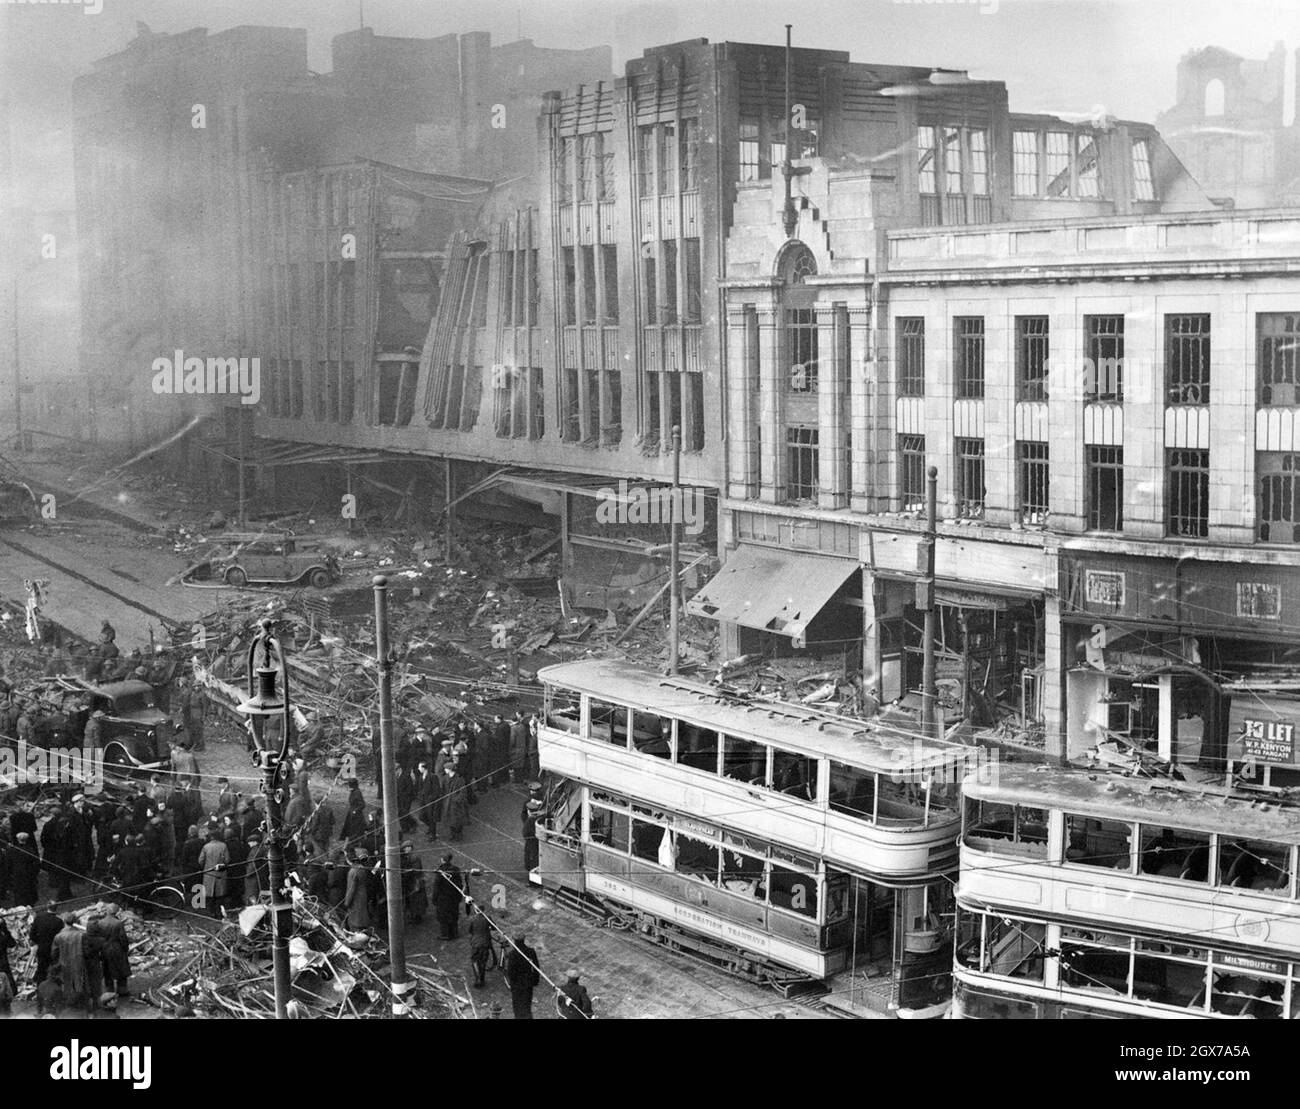 Bomb damage in Sheffield city centre during The Blitz, December 1940 Stock Photo